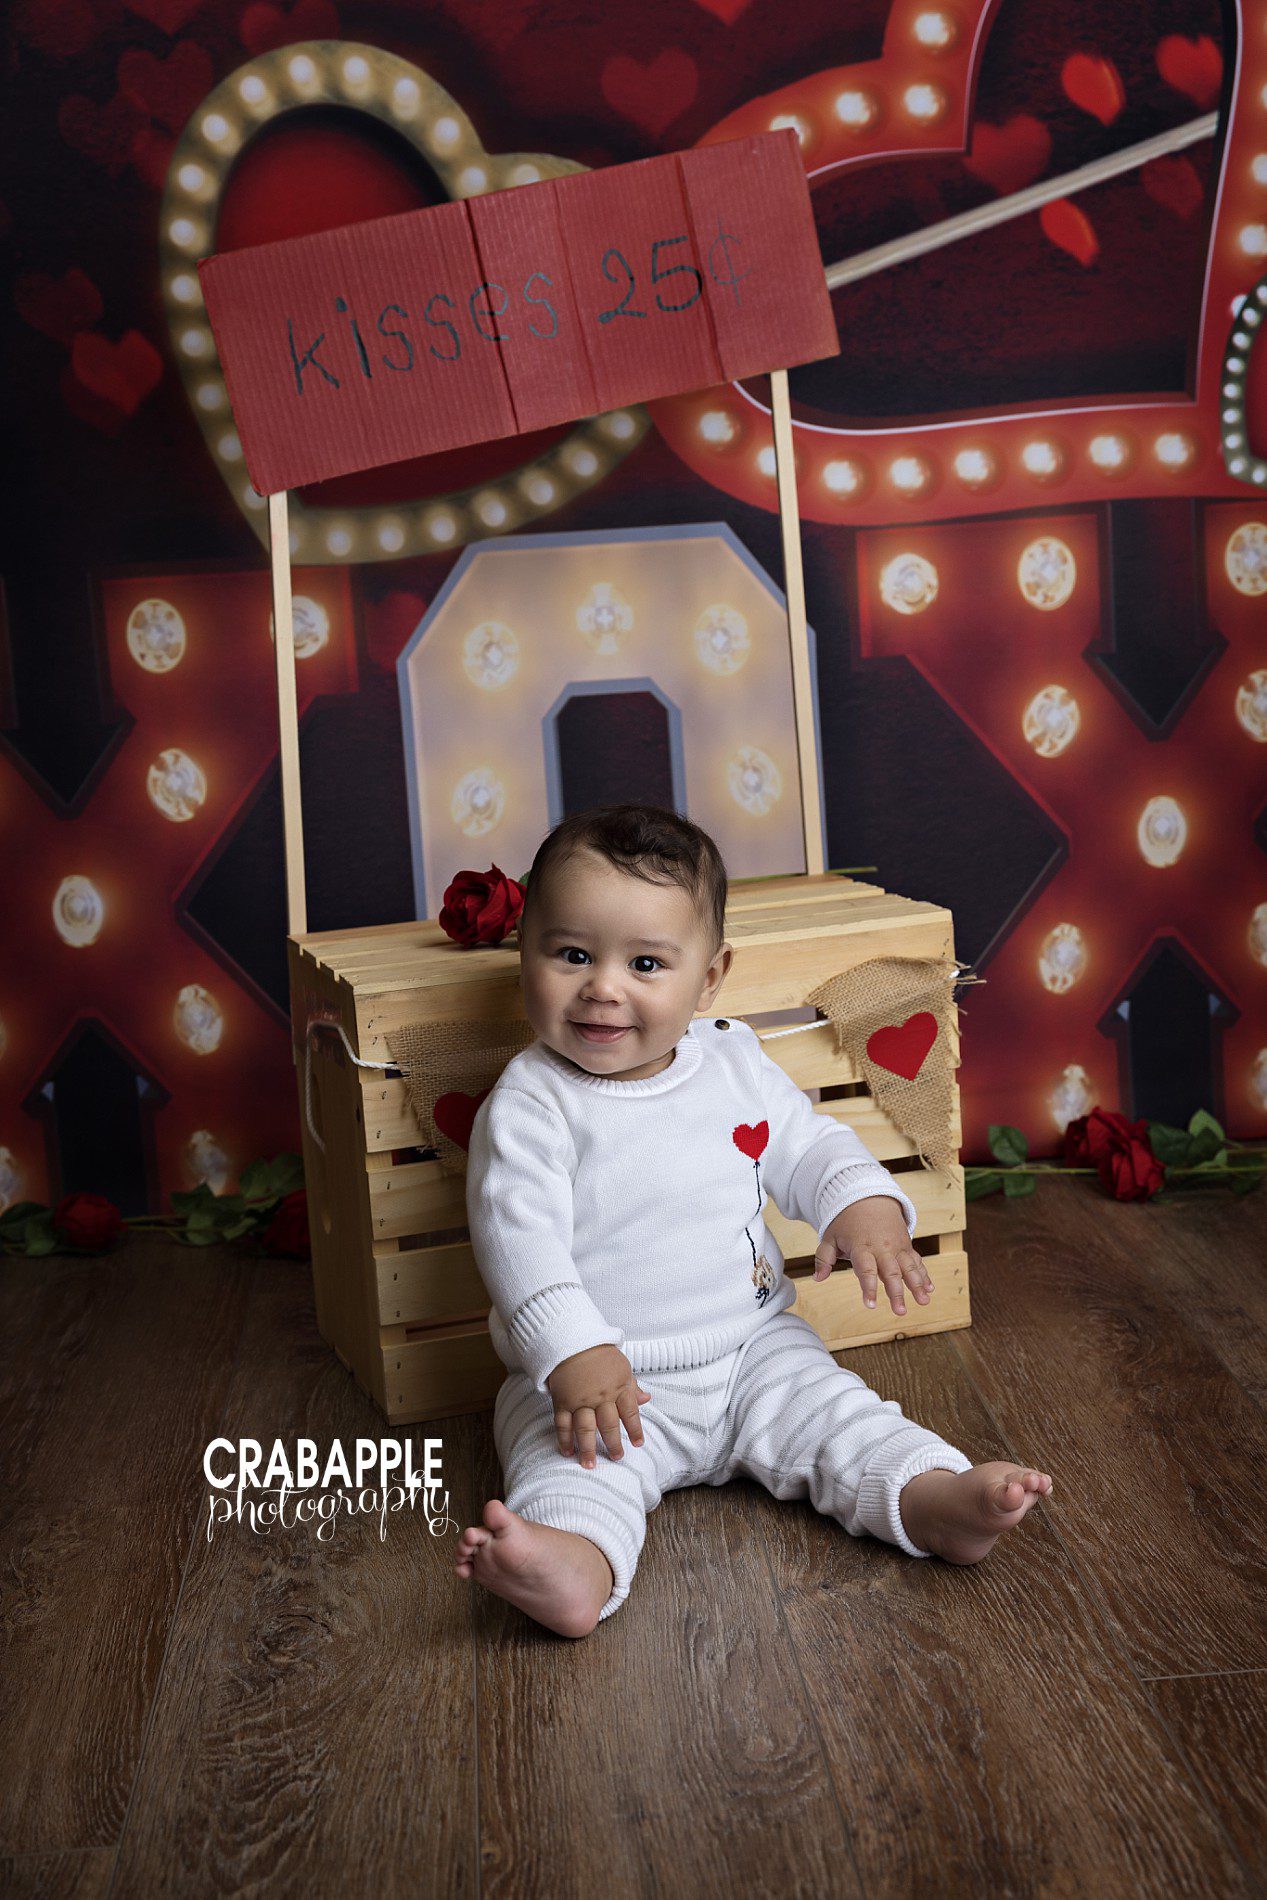 cute kissing booth baby photos for valentine's day